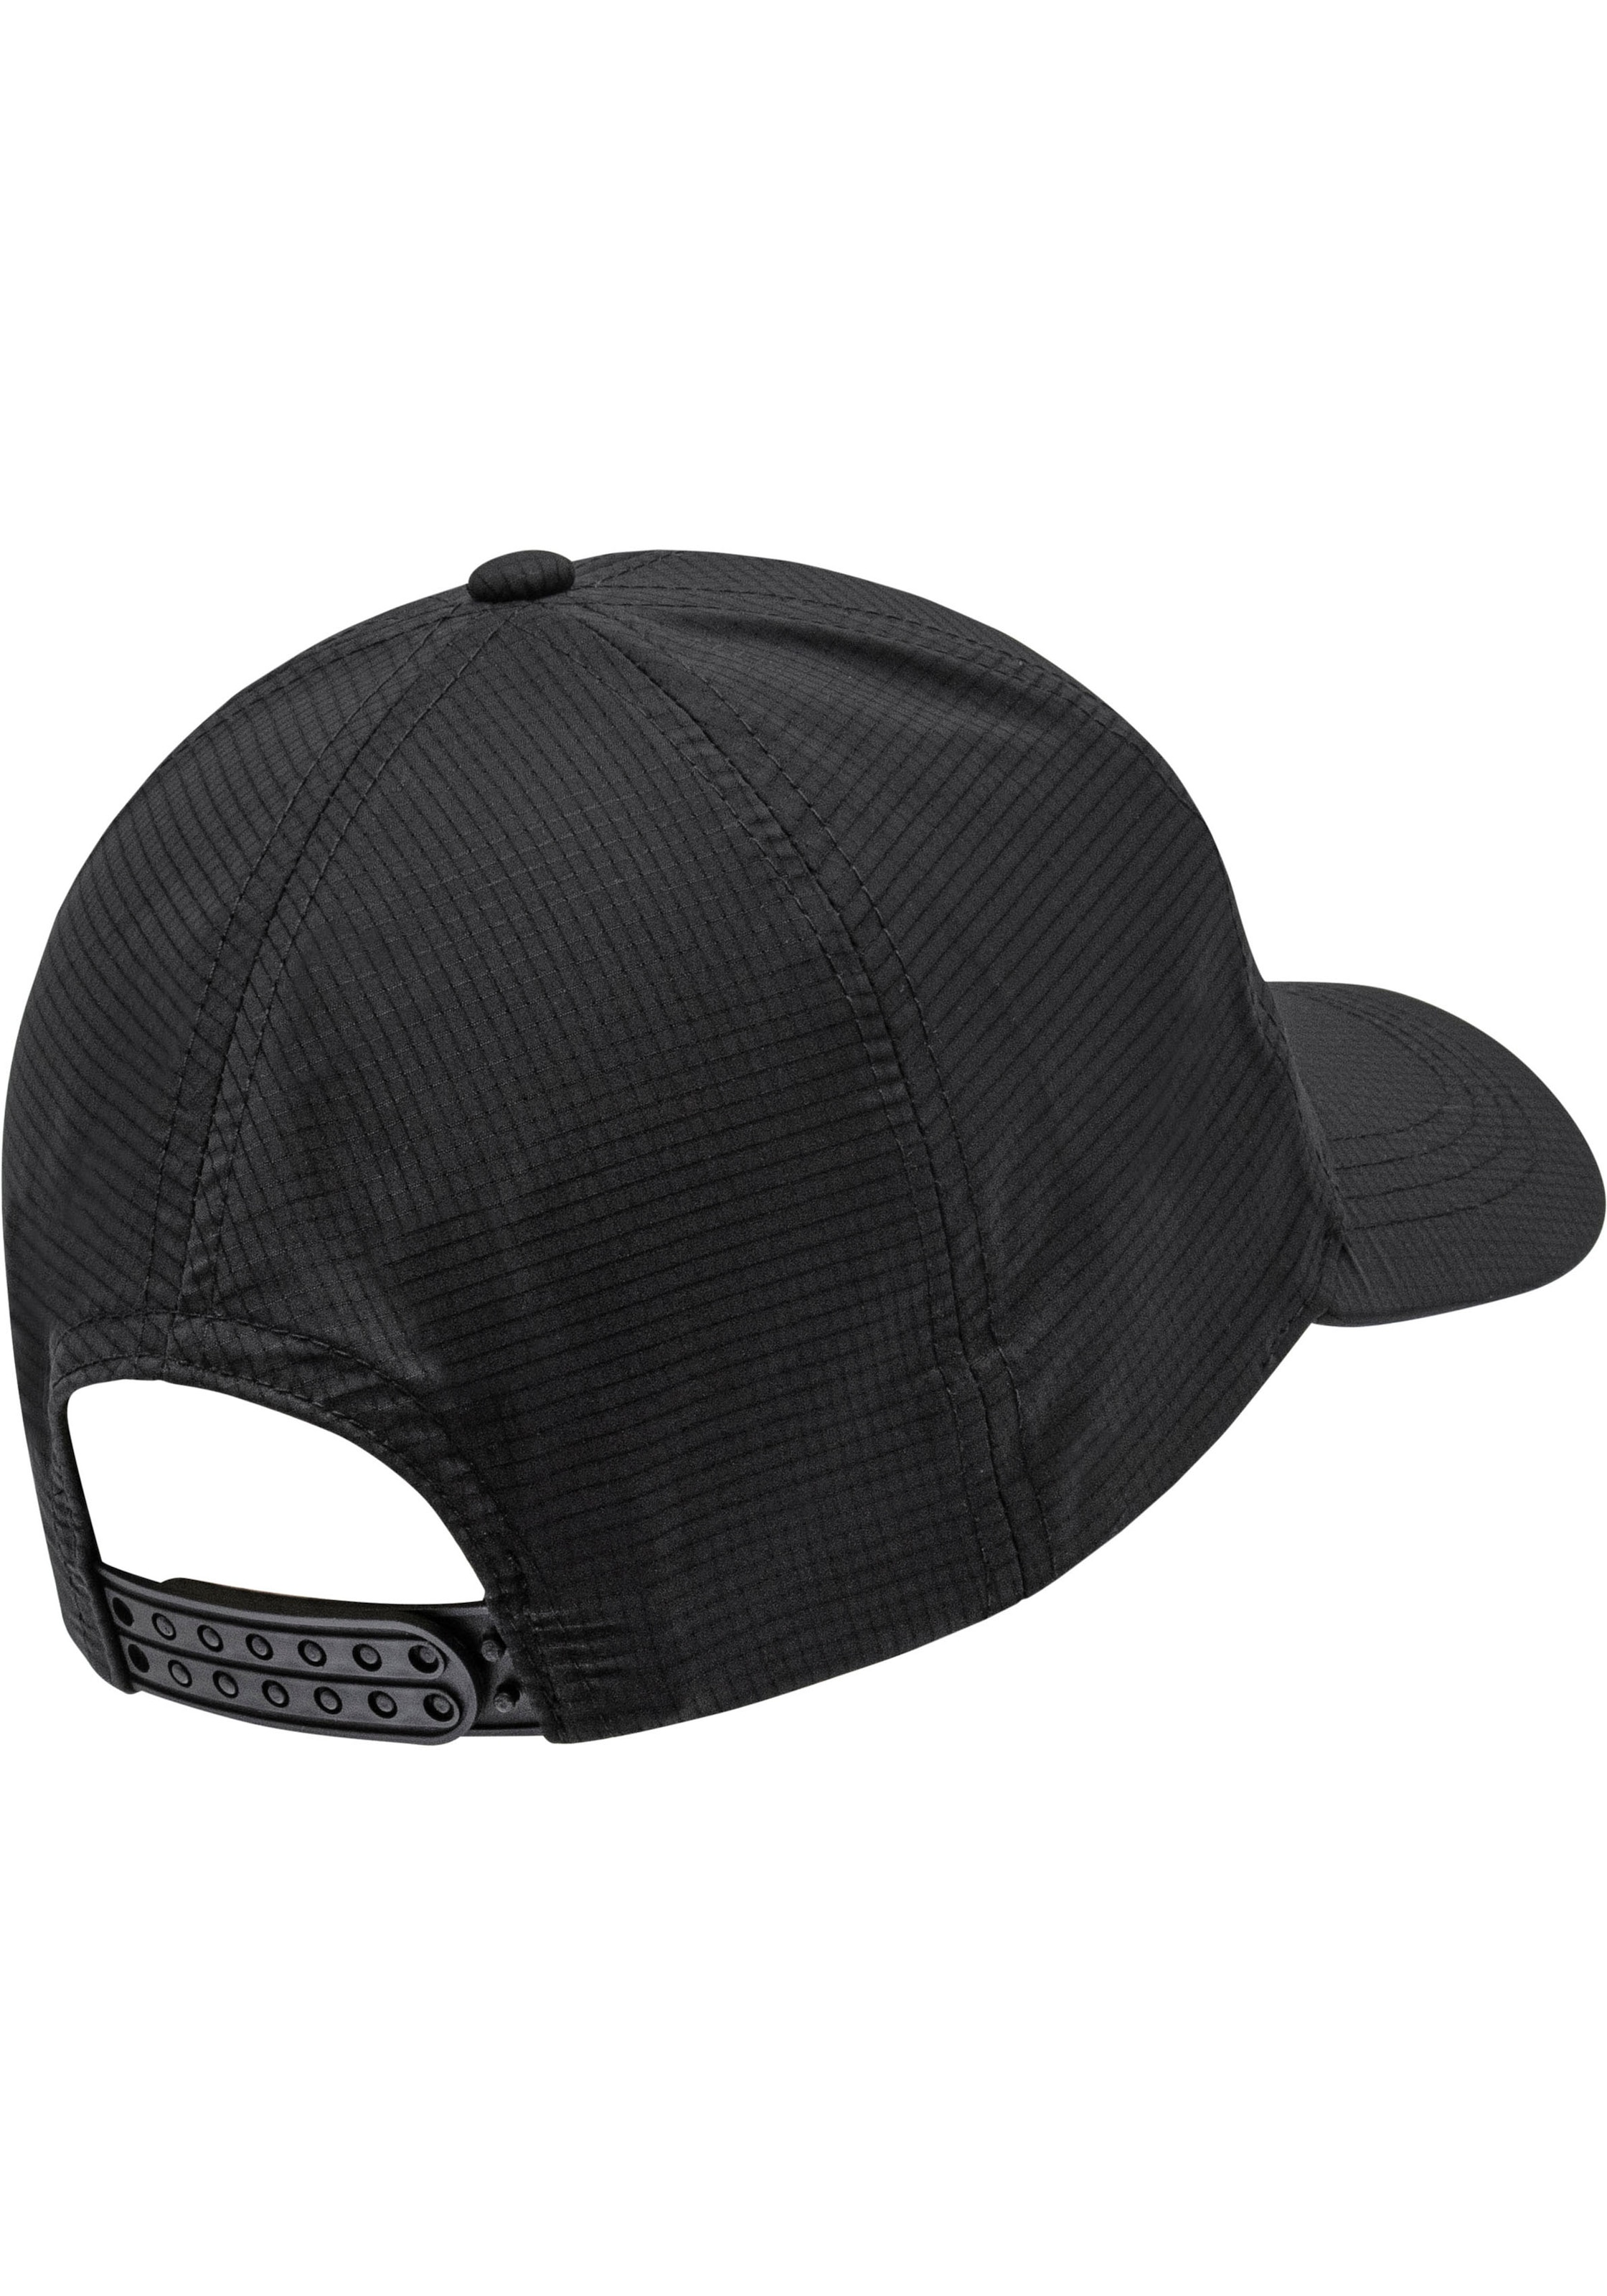 Baseball Hat online Cap, bei Langley UNIVERSAL chillouts